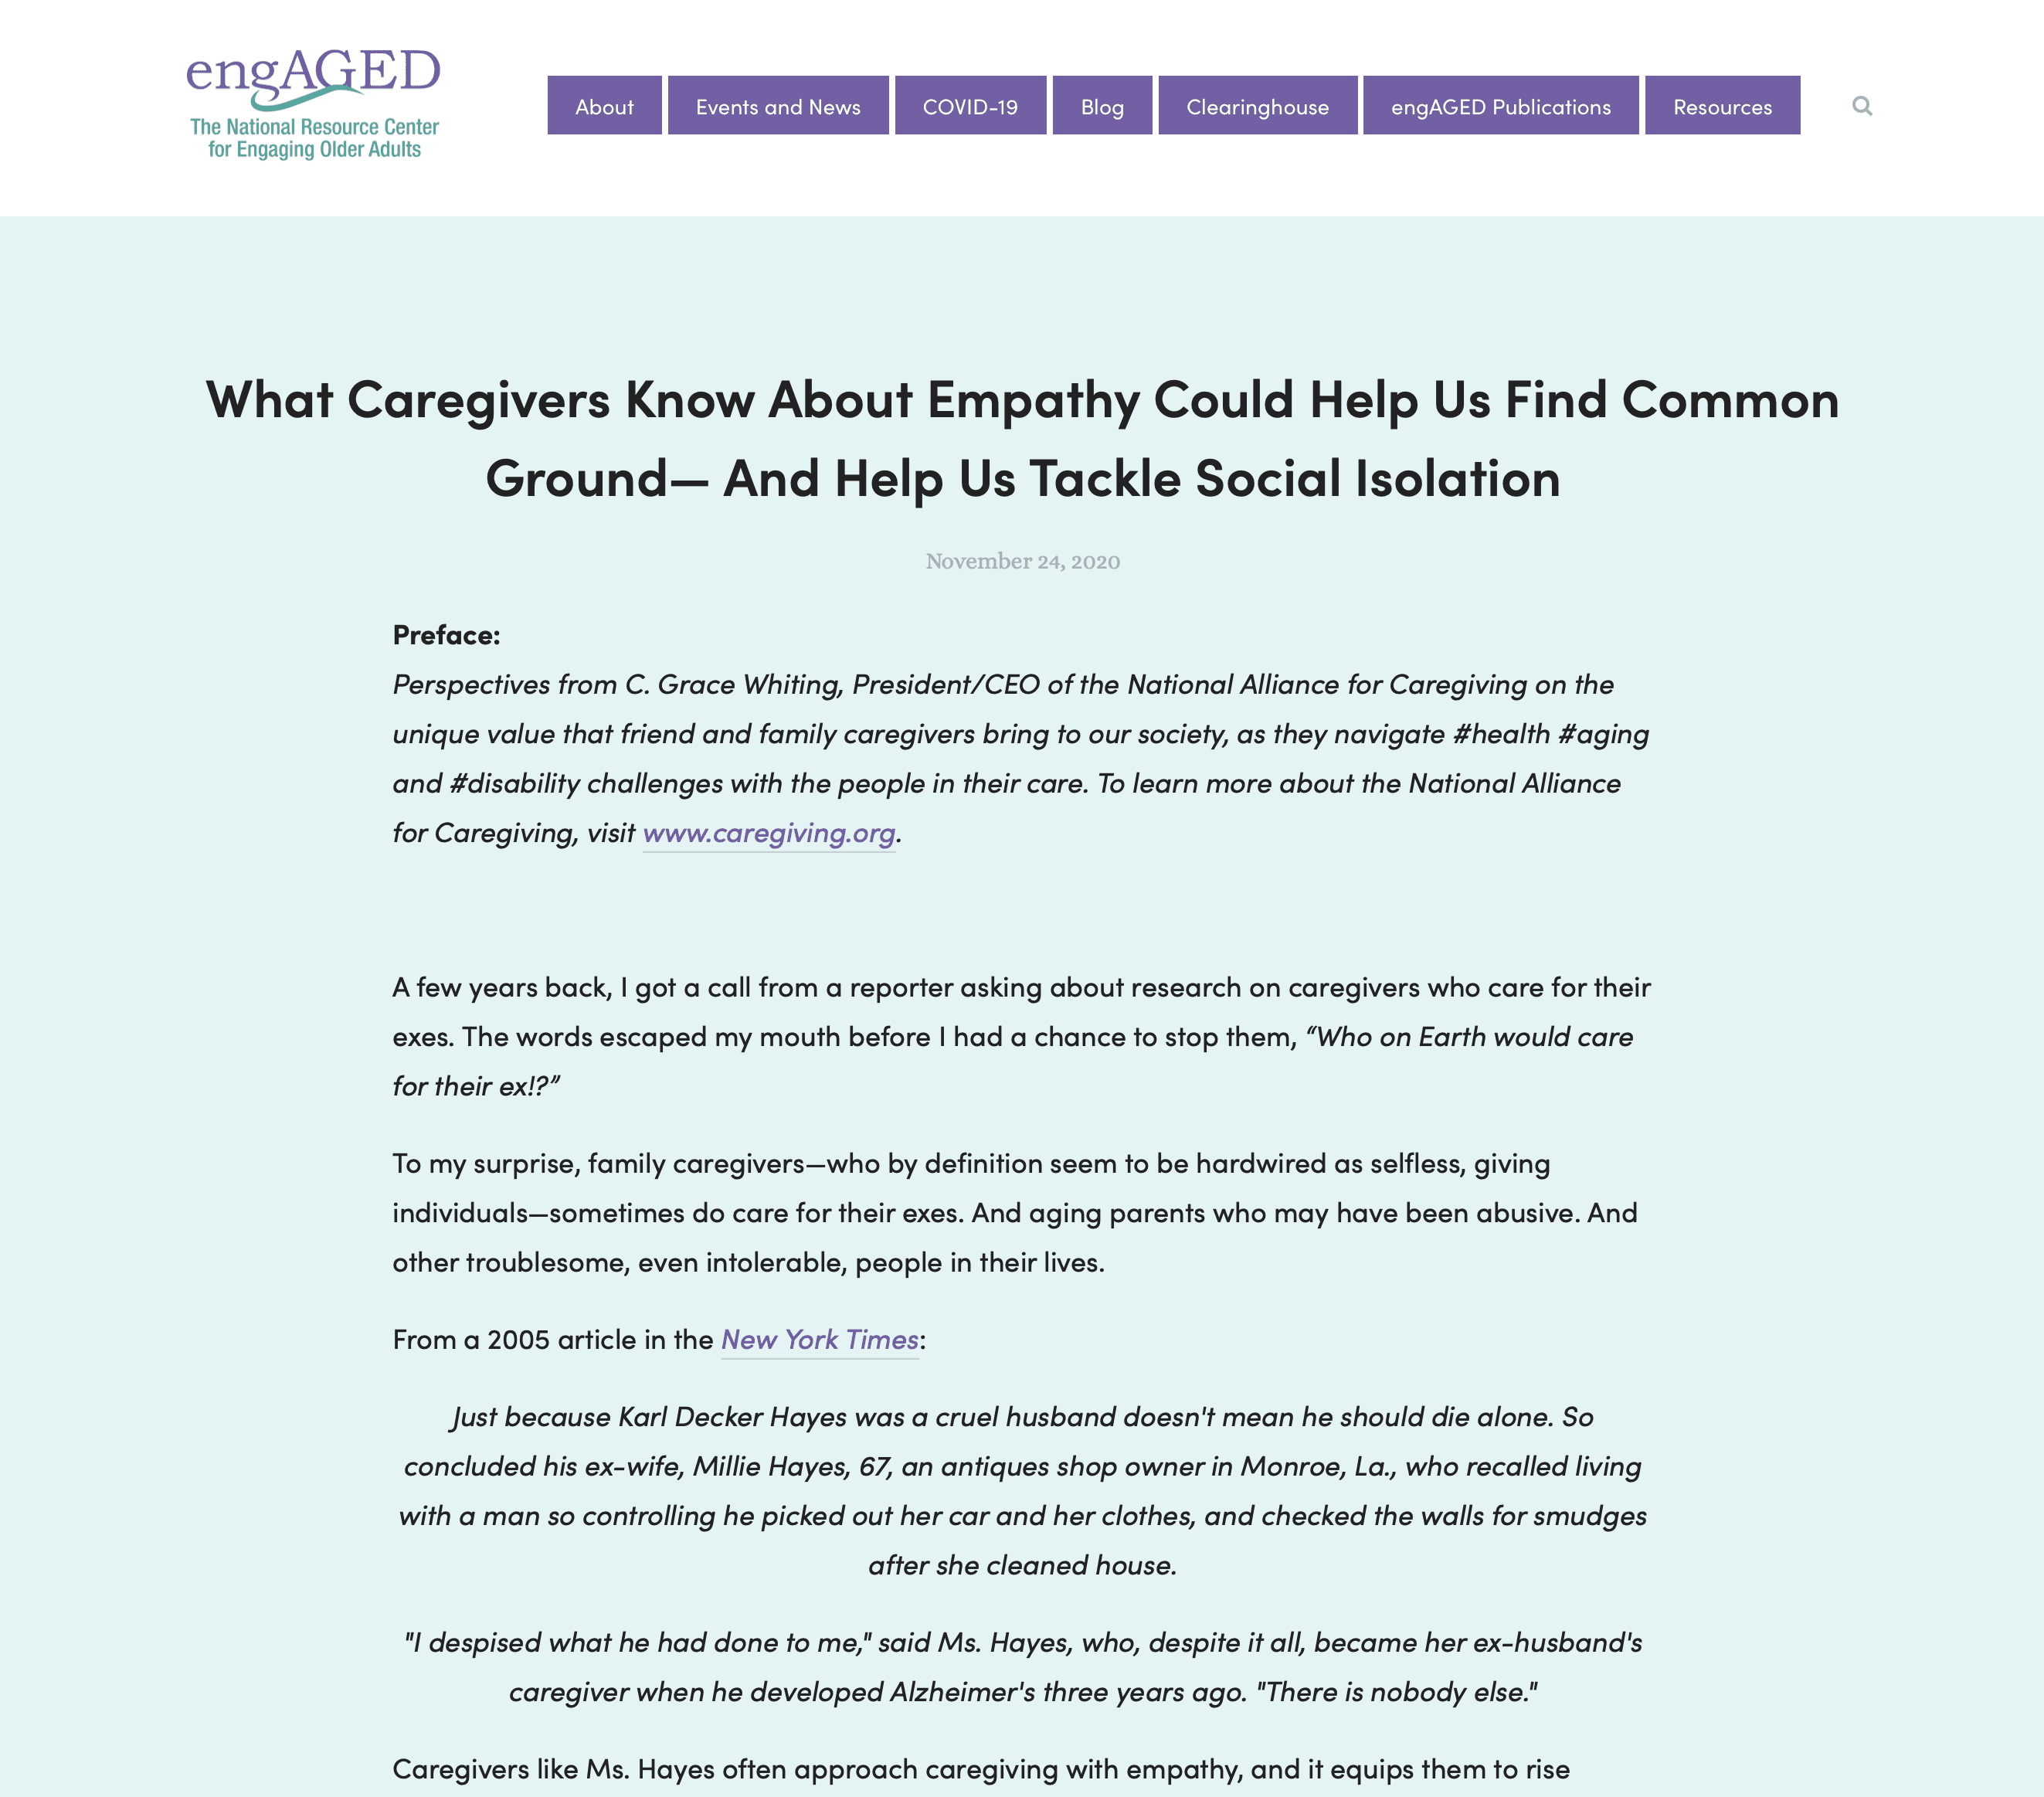 Engaging Older Adults | What Caregivers Know About Empathy Could Help Us Find Common Ground